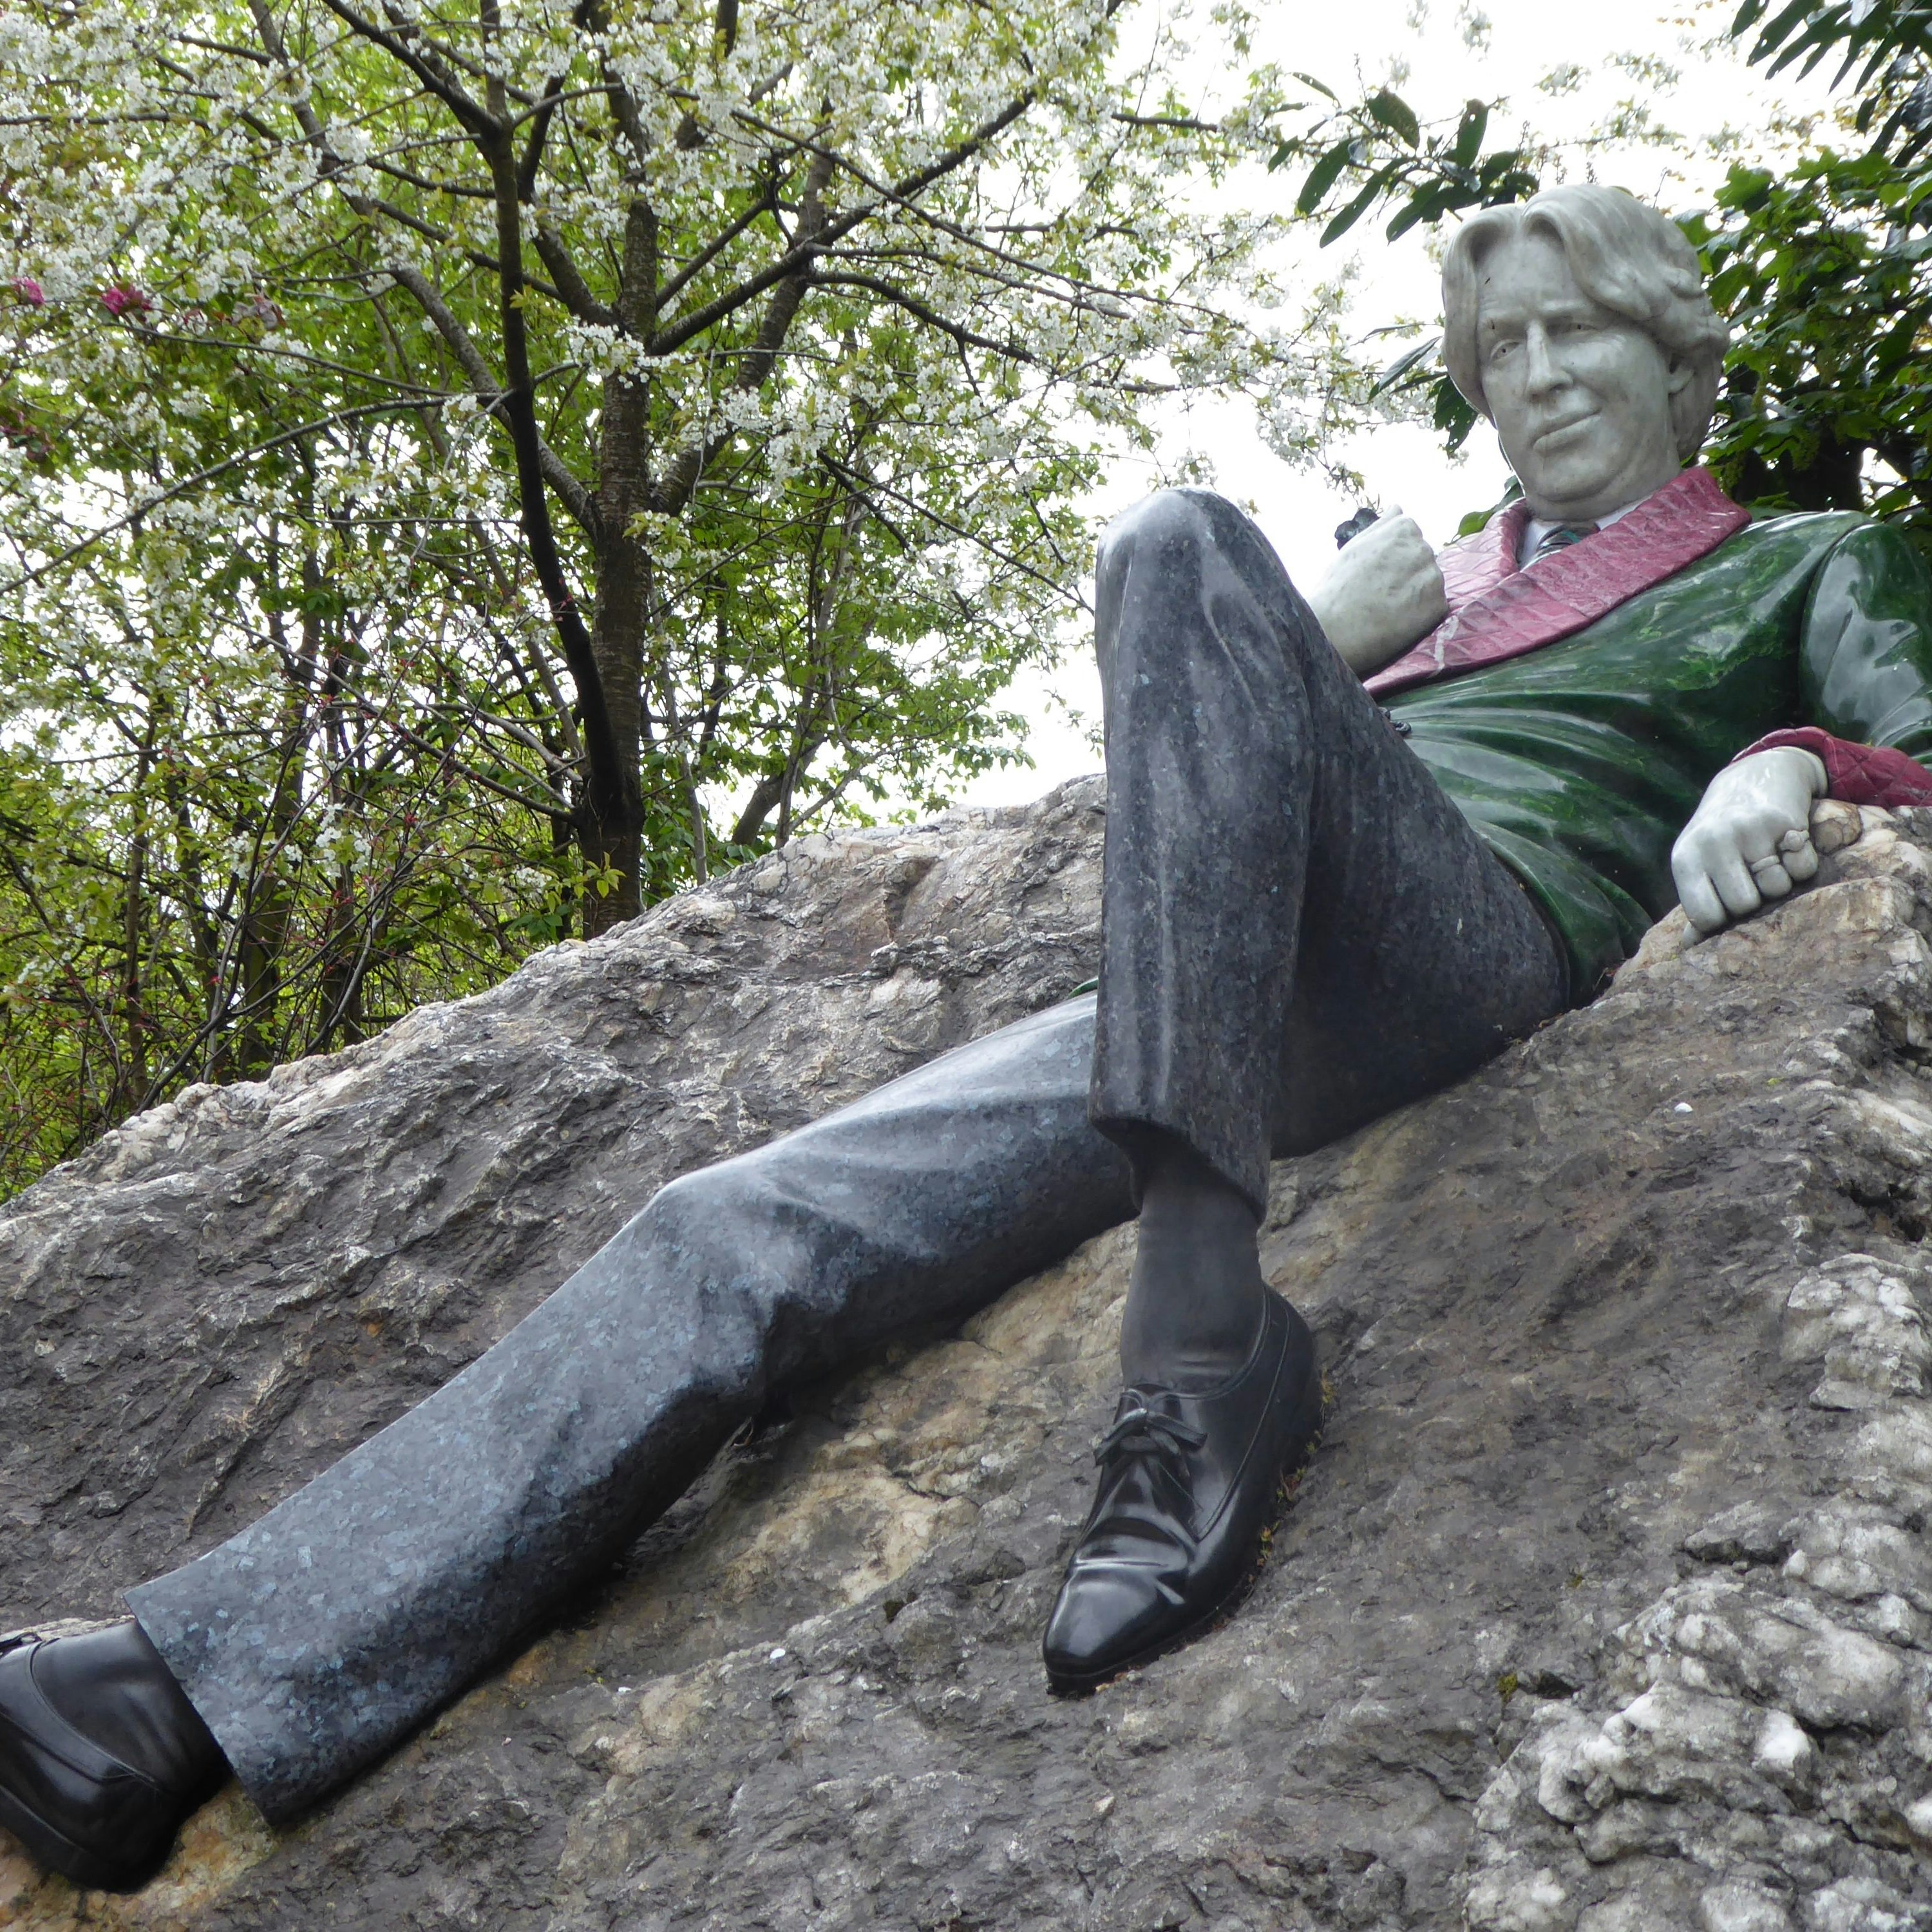 Merrion Square's statue of Oscar Wilde, complete with smirk and smoking jacket